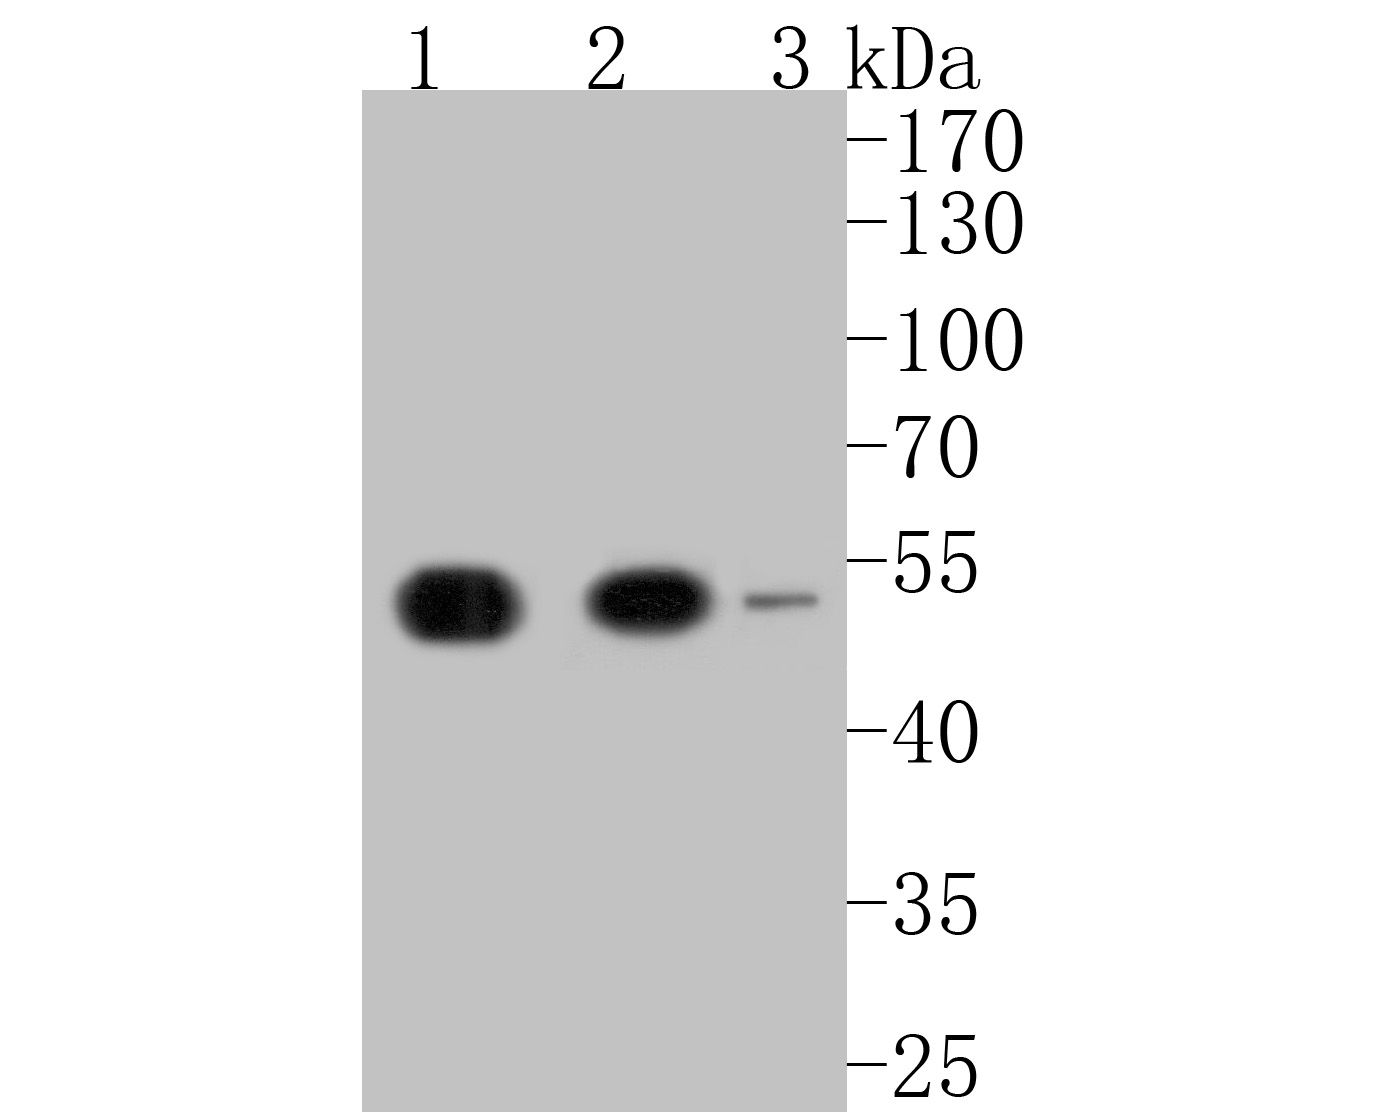 Western blot analysis of KPTN on different lysates. Proteins were transferred to a PVDF membrane and blocked with 5% BSA in PBS for 1 hour at room temperature. The primary antibody (ER2001-17, 1/500) was used in 5% BSA at room temperature for 2 hours. Goat Anti-Rabbit IgG - HRP Secondary Antibody (HA1001) at 1:5,000 dilution was used for 1 hour at room temperature.<br />
Positive control: <br />
Lane 1: HepG2 cell lysate<br />
Lane 2: SH-SY5Y cell lysate<br />
Lane 3: Rat brain tissue lysate